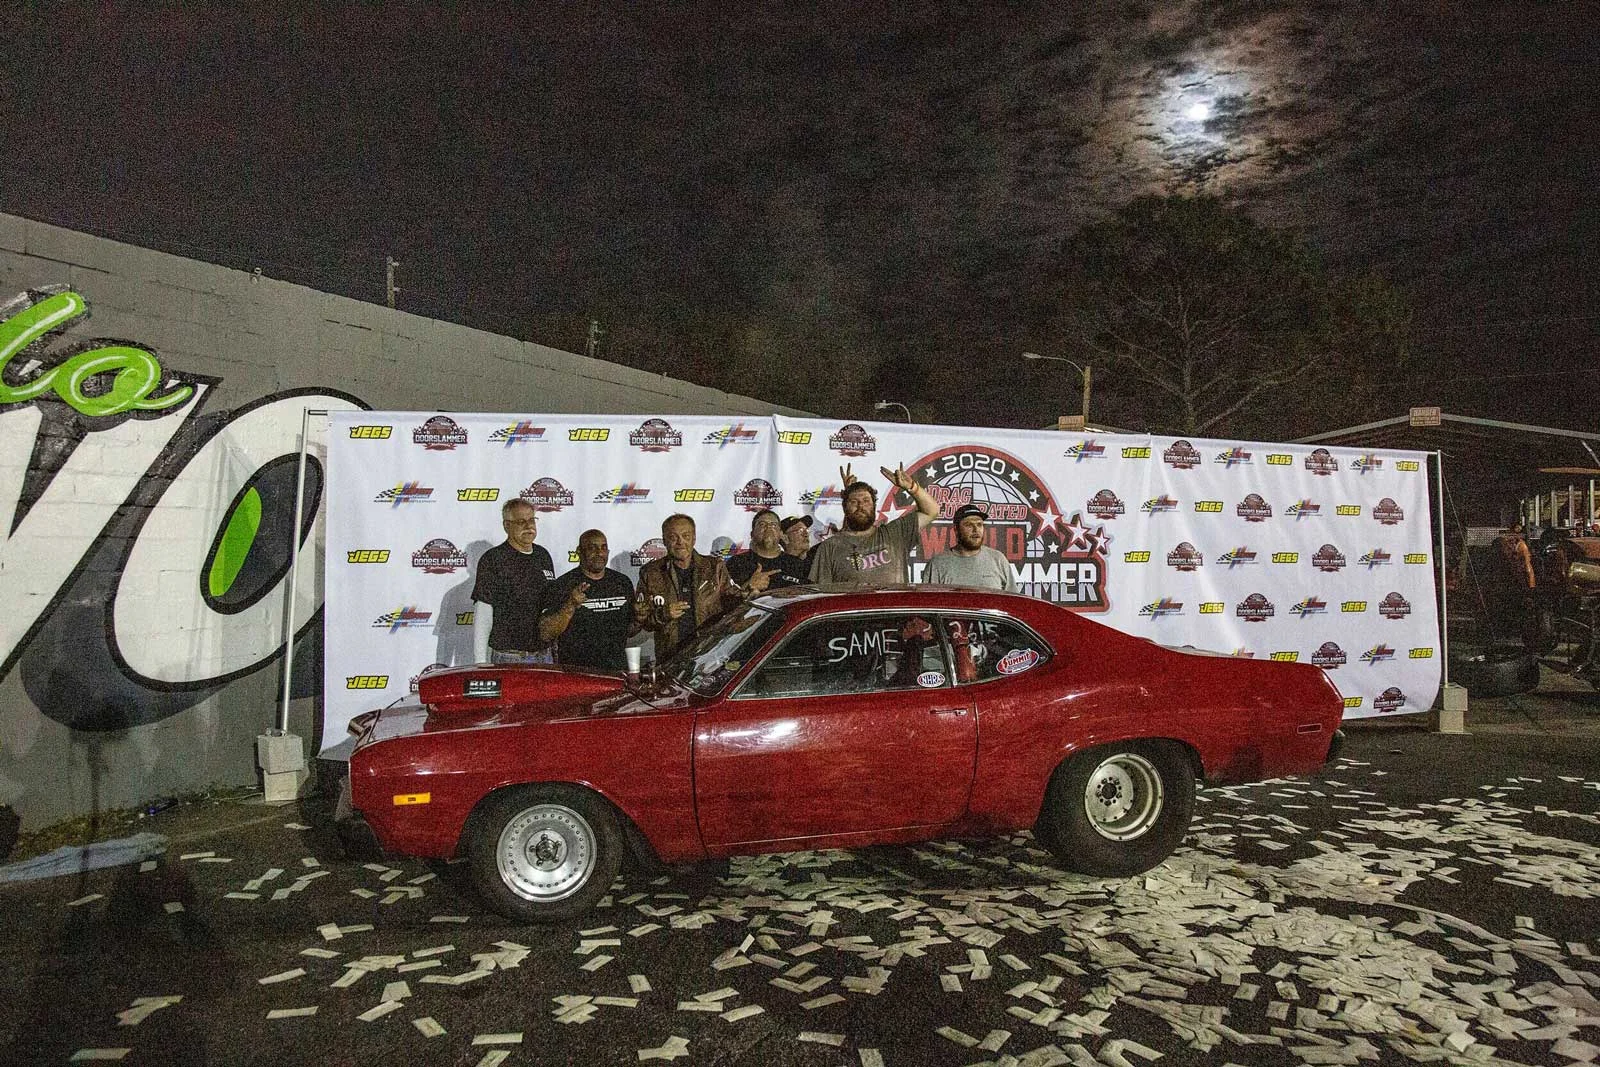 Winners Circle Drag Illustrated World Doorslammer Nationals Presented by CTech Manufacturing